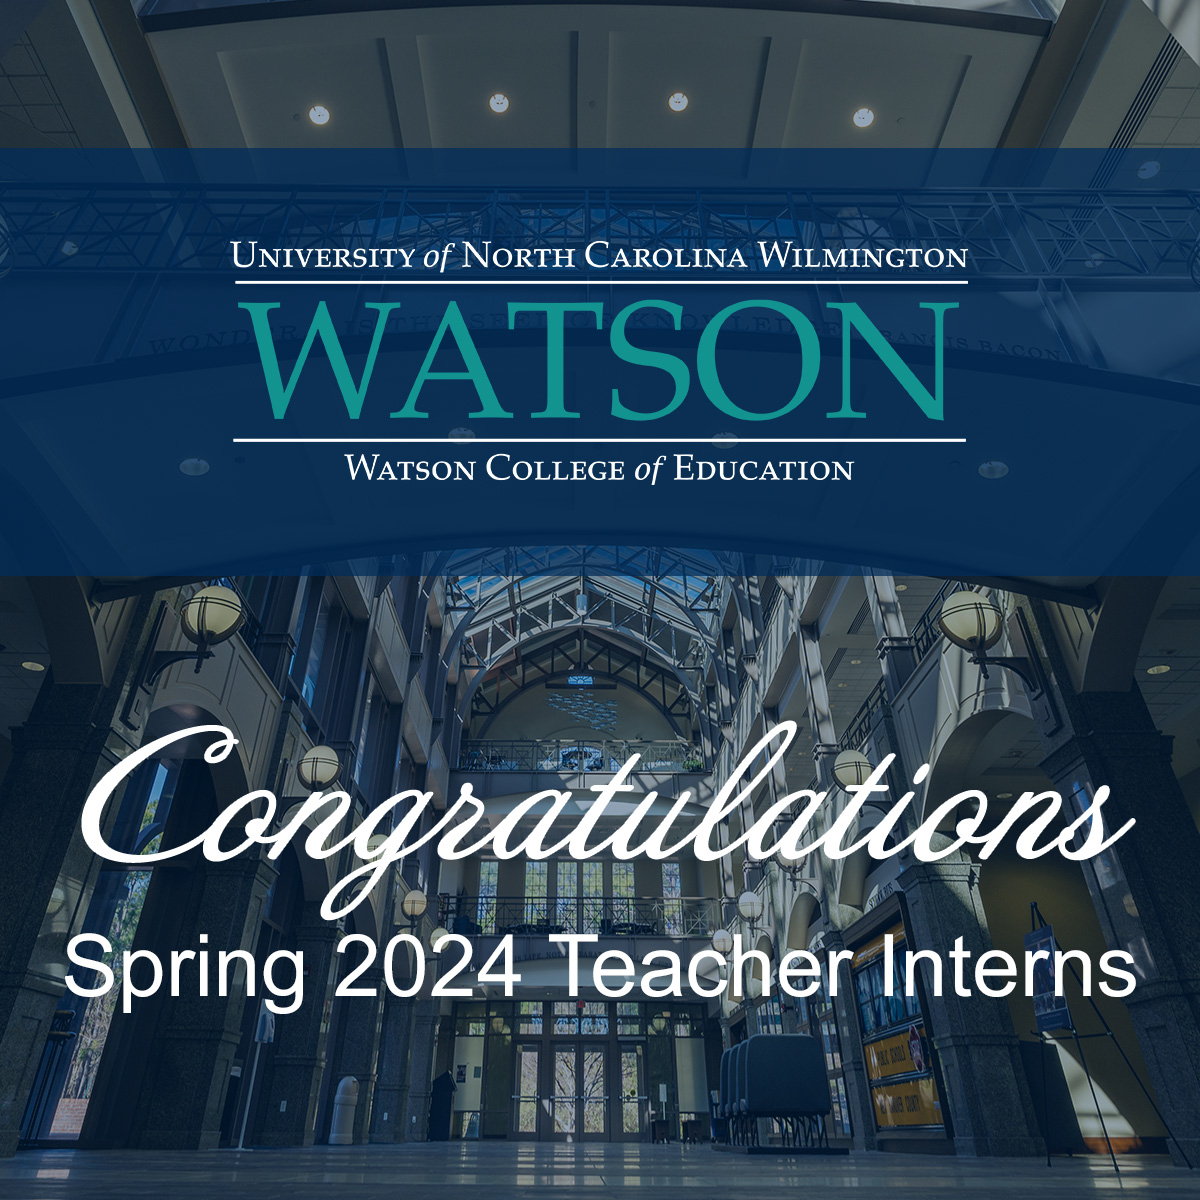 Congratulations to all of our Spring 2024 Teacher Interns! We are so very proud of you! #ItBeginsWithTeachers #Watson bit.ly/3xU1NQG